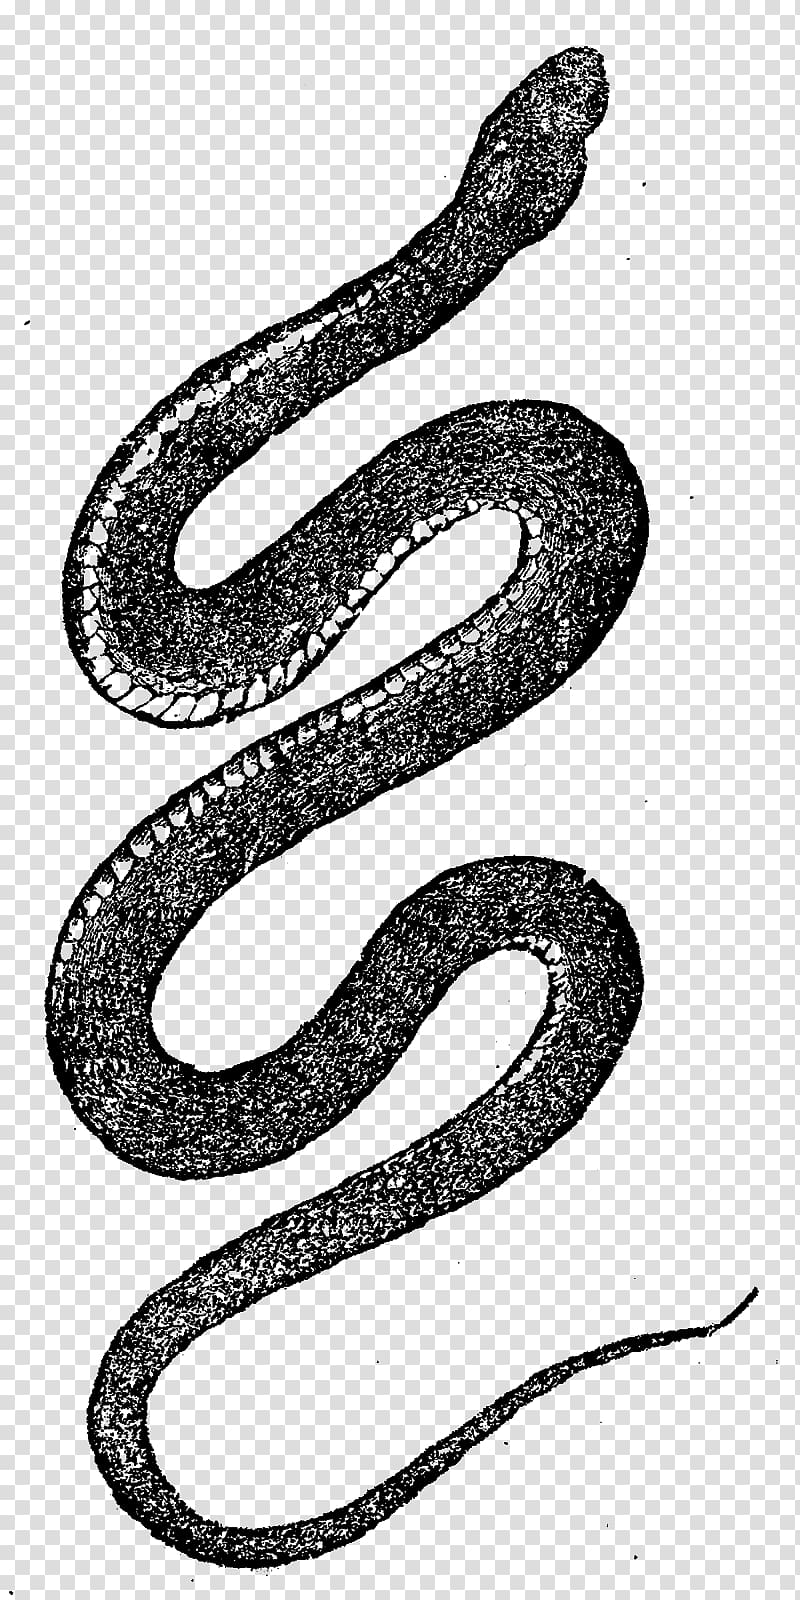 Corn snake Reptile Rattlesnake Vipers, snakes transparent background PNG clipart